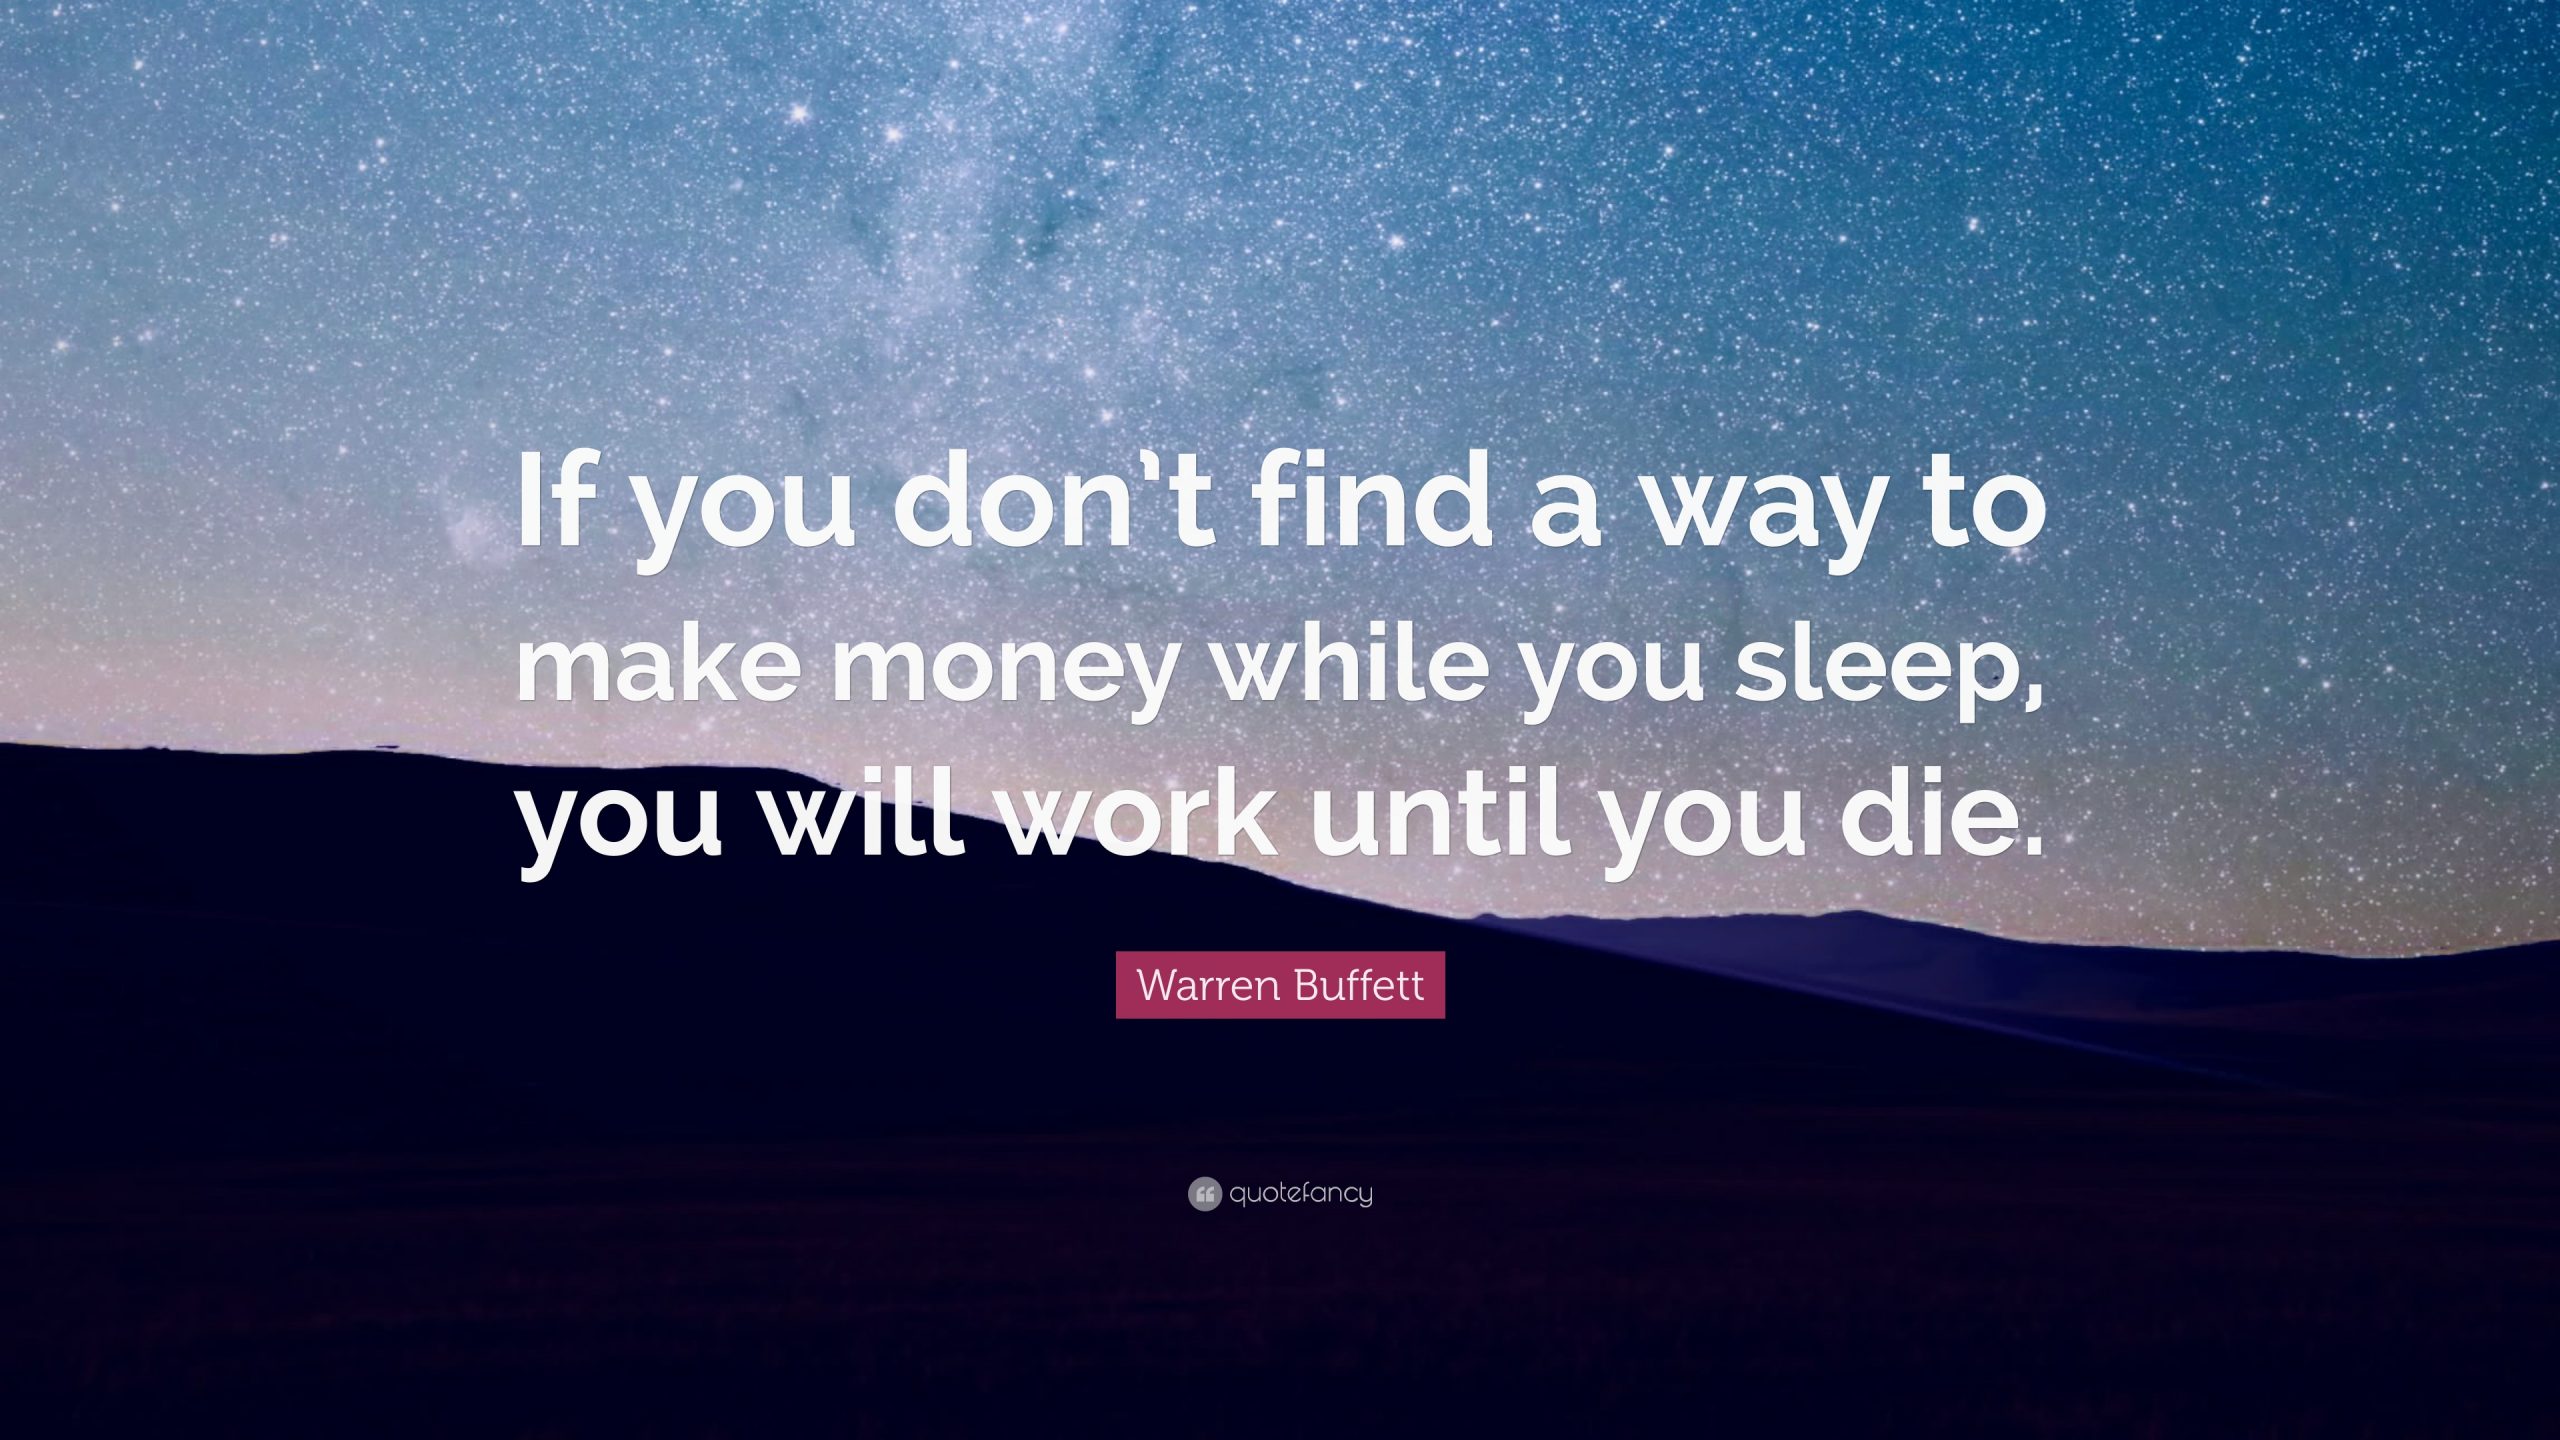 A Picture showing the quote if "you don't find a way to make money while you sleep, you will work until you die".